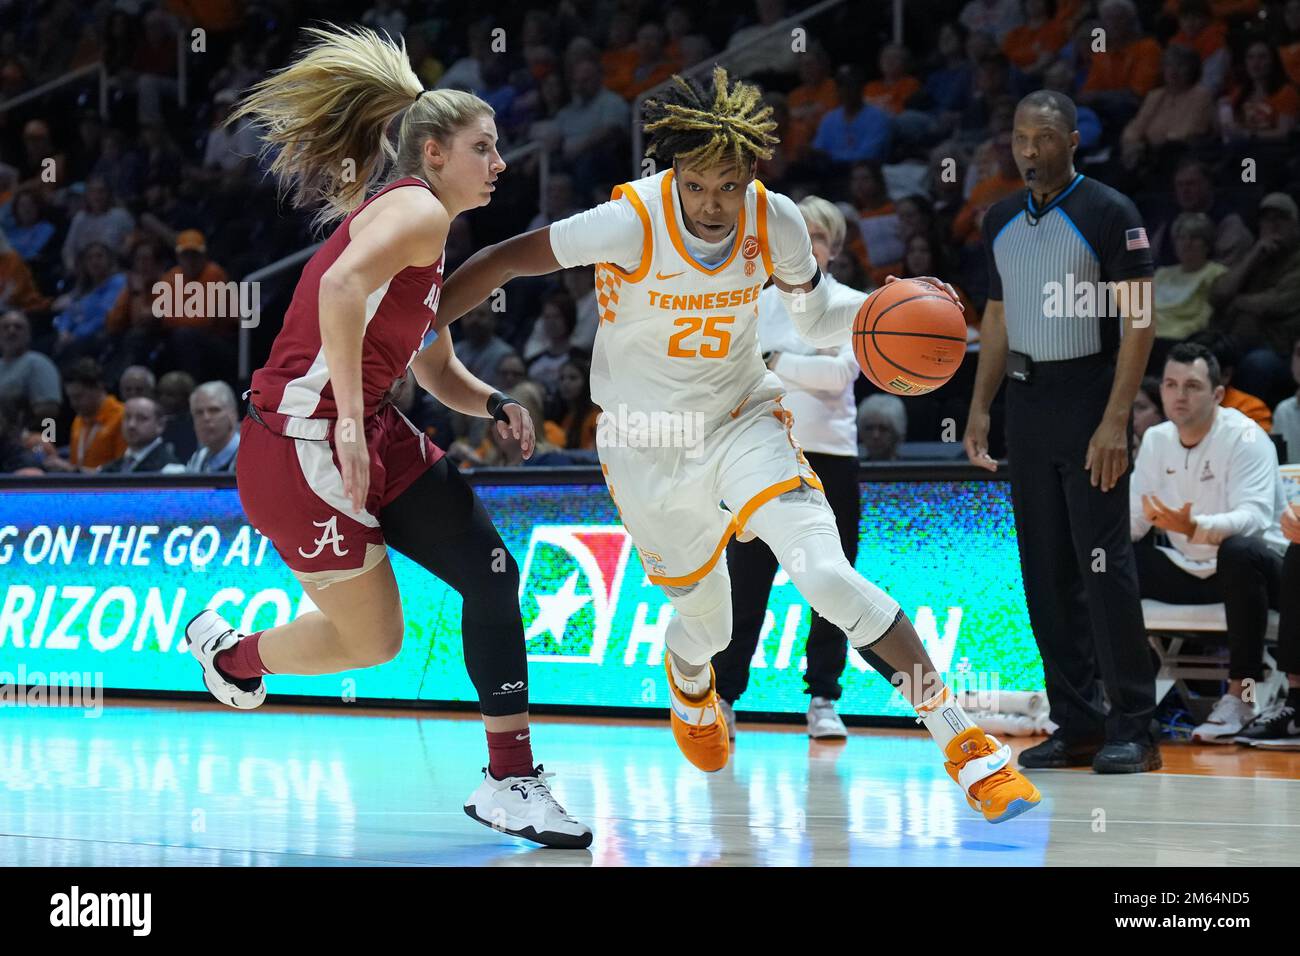 January 1, 2023: Jordan Horston #25 of the Tennessee Lady Vols drives to the basket against Sarah Ashlee Barker #3 of the Alabama Crimson Tide during the NCAA basketball game between the University of Tennessee Lady Volunteers and the University of Alabama Crimson Tide at Thompson Boling Arena in Knoxville TN Tim Gangloff/CSM Stock Photo